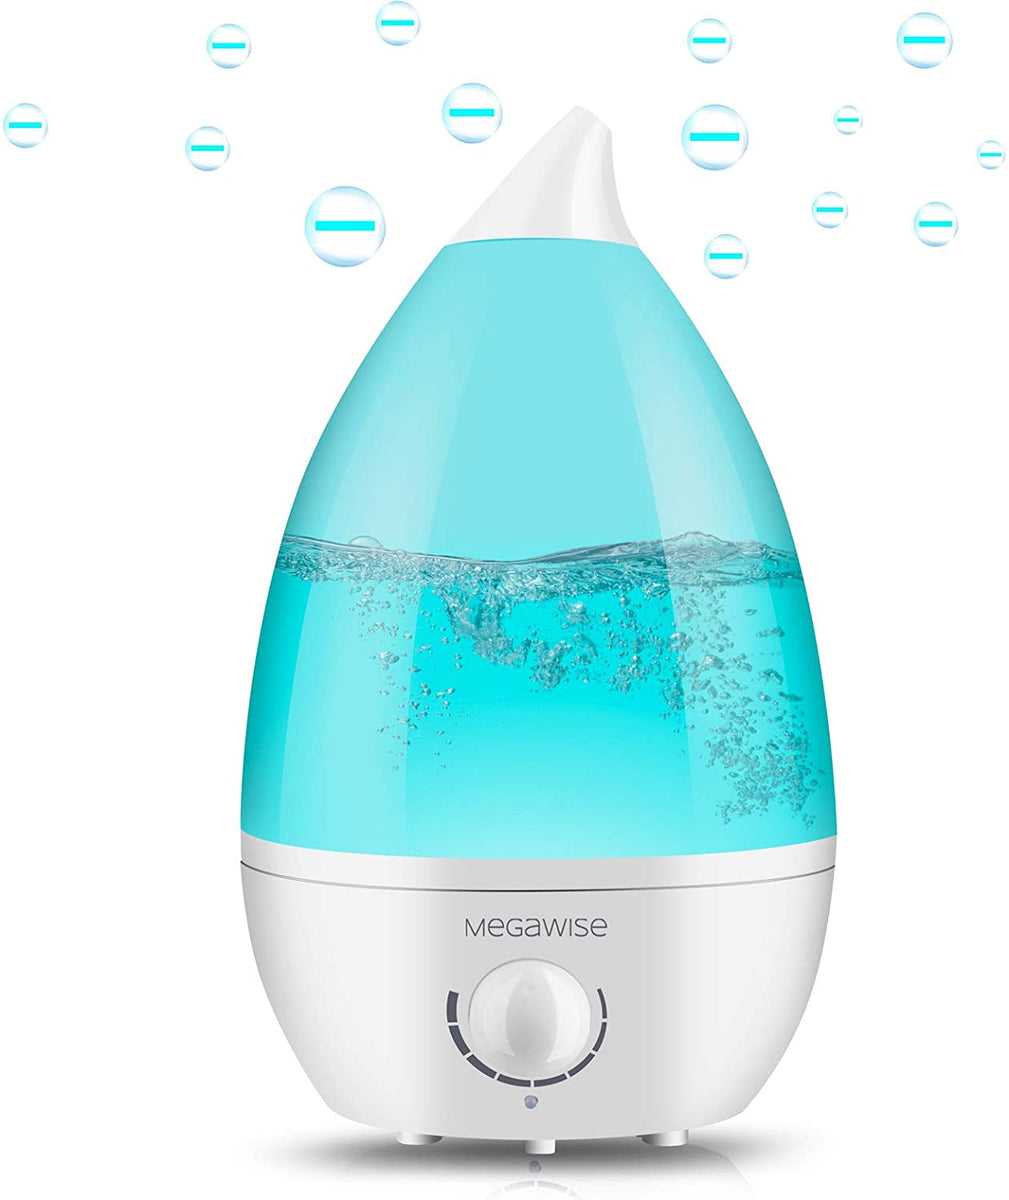 MEGAWISE 1.5L/0.53 Gal Cool Mist Humidifiers, Essential Oil 